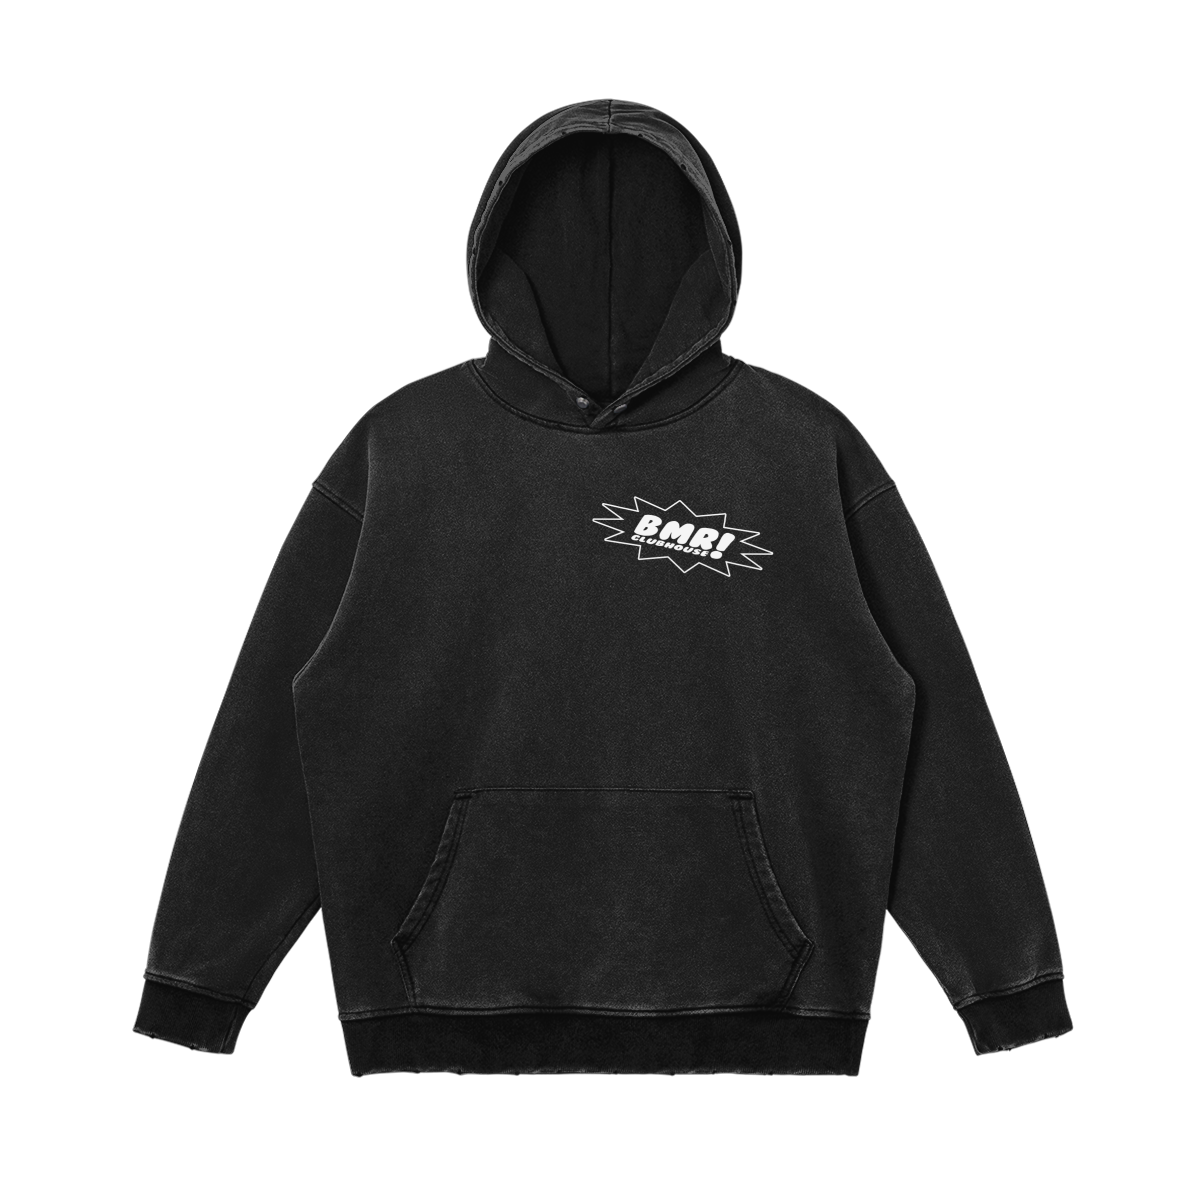 SPACE COUPE Hoodie